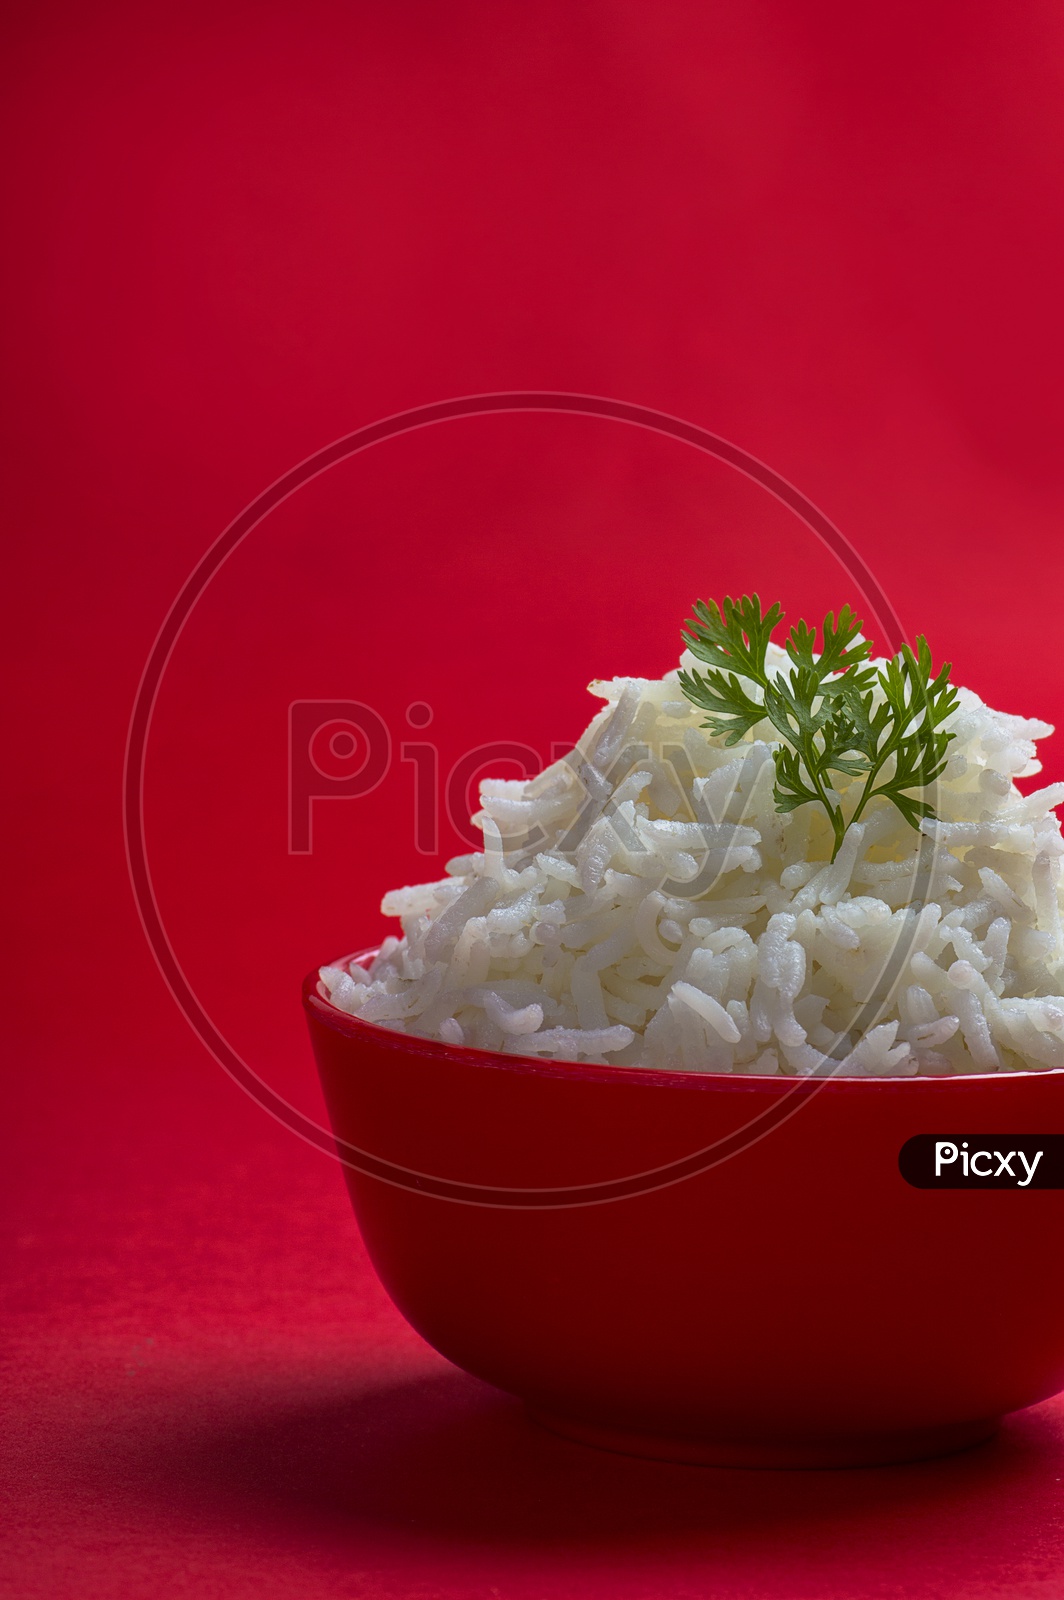 Cooked plain white basmati rice in a red bowl on red background